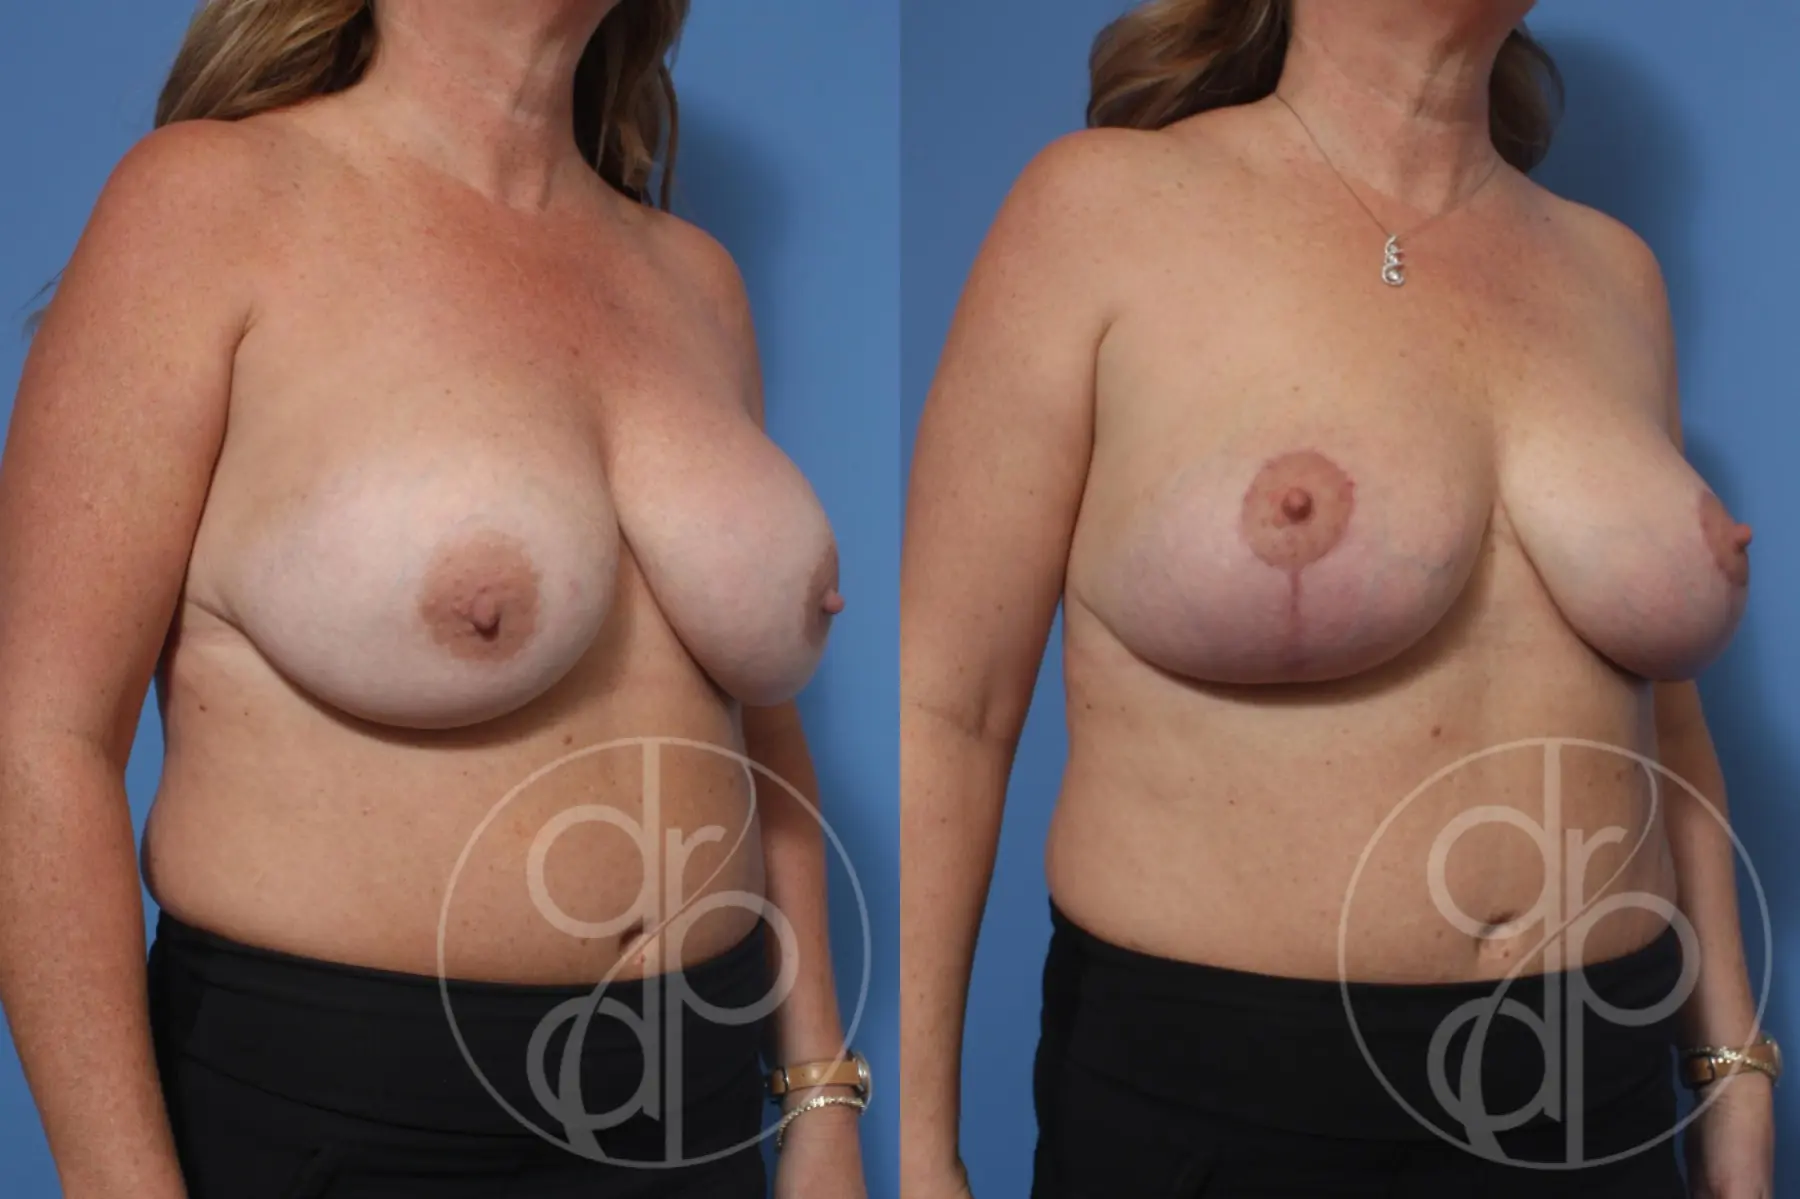 patient 10492 remove and replace breast implants before and after result - Before and After 2